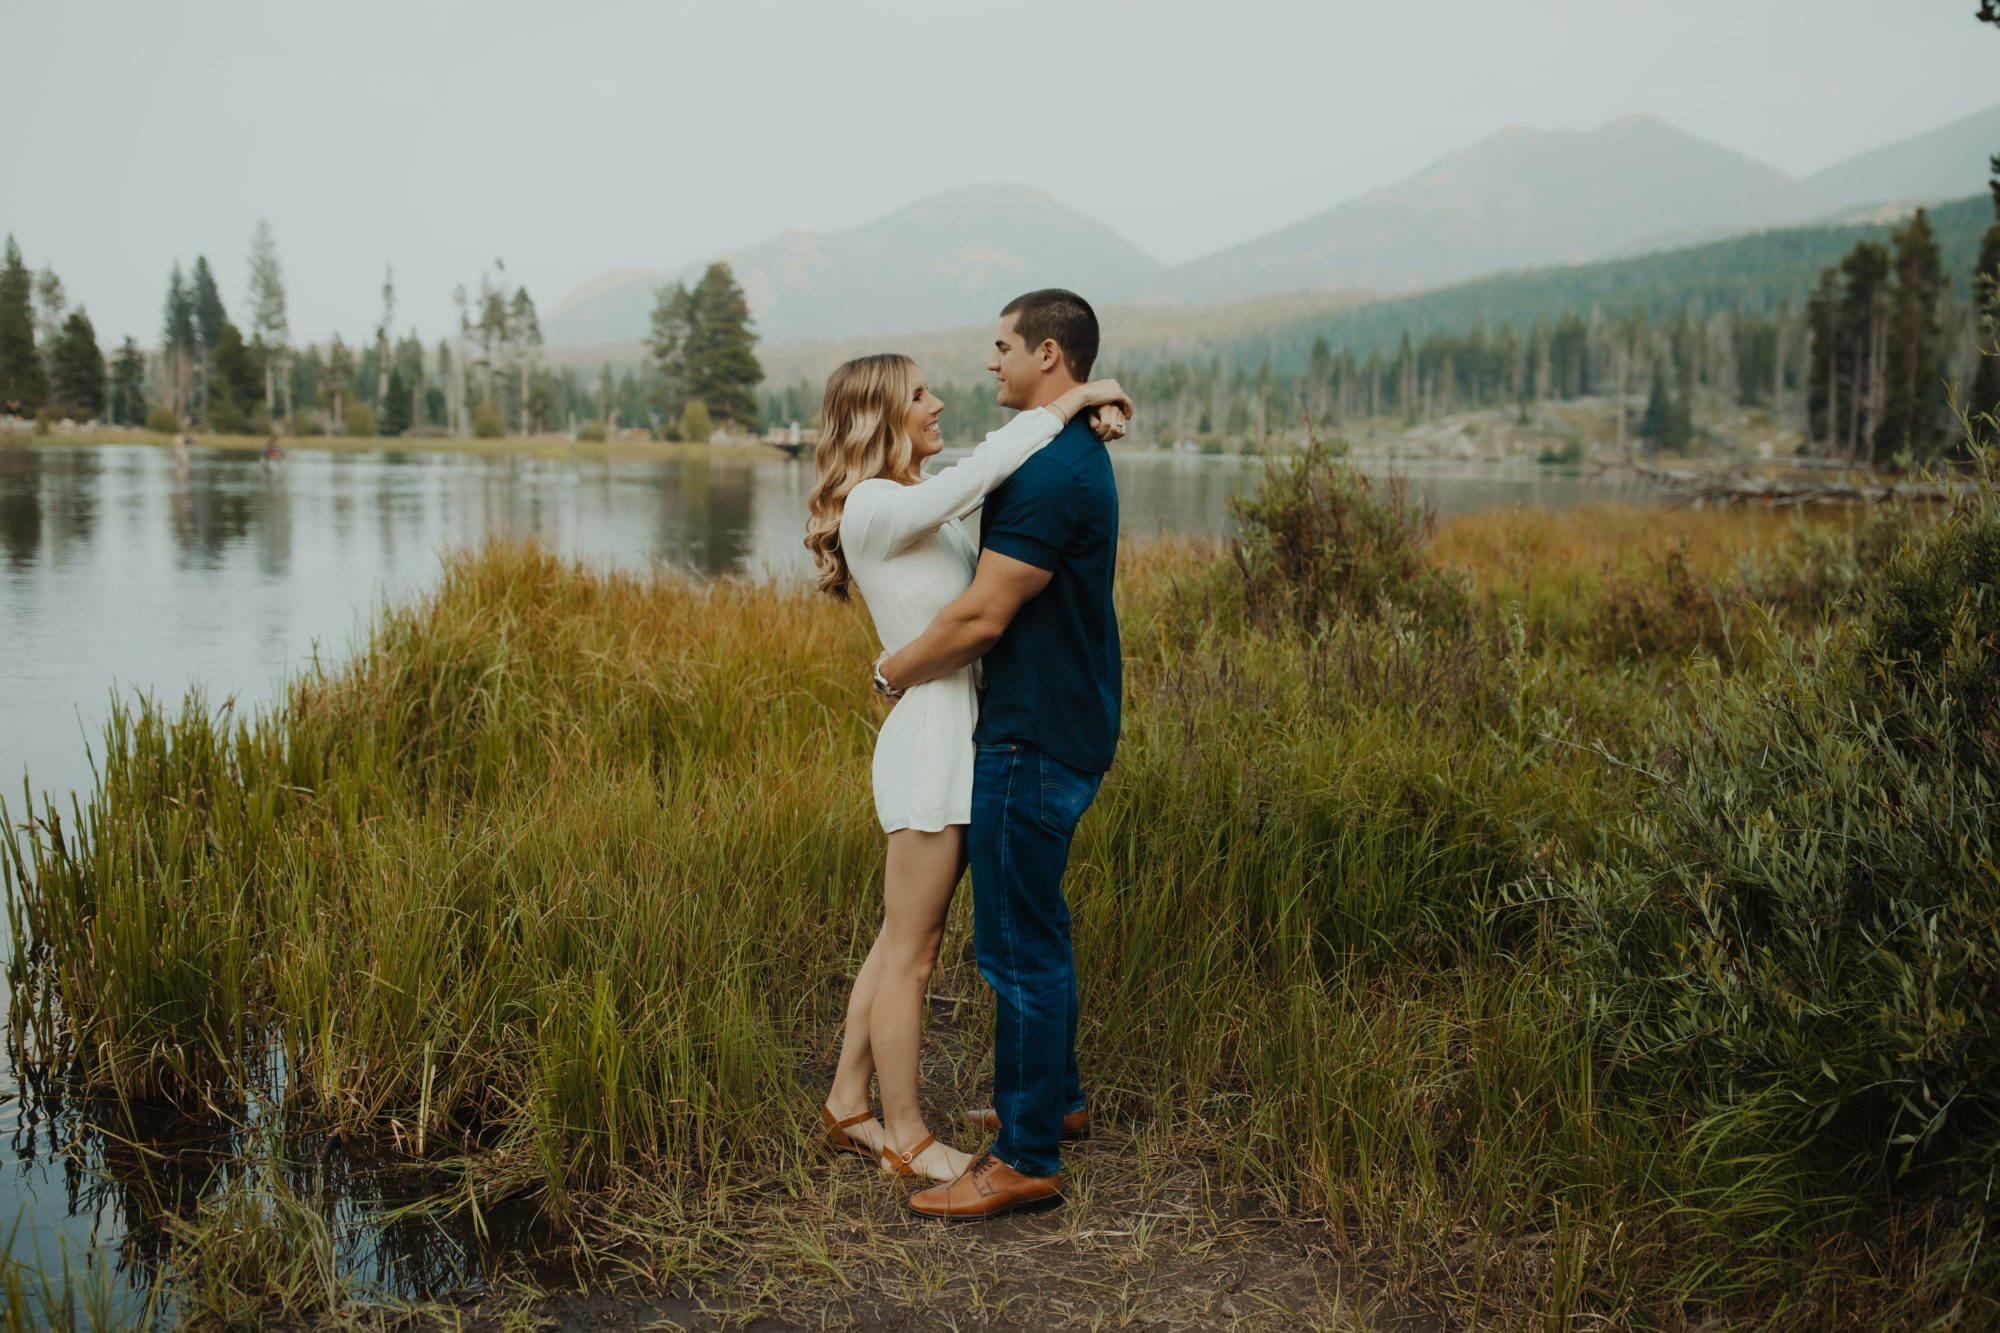 Fiancee wrapping her arms around her boyfriend in front of a lake in the PNW with mountains silhouetted in the  background